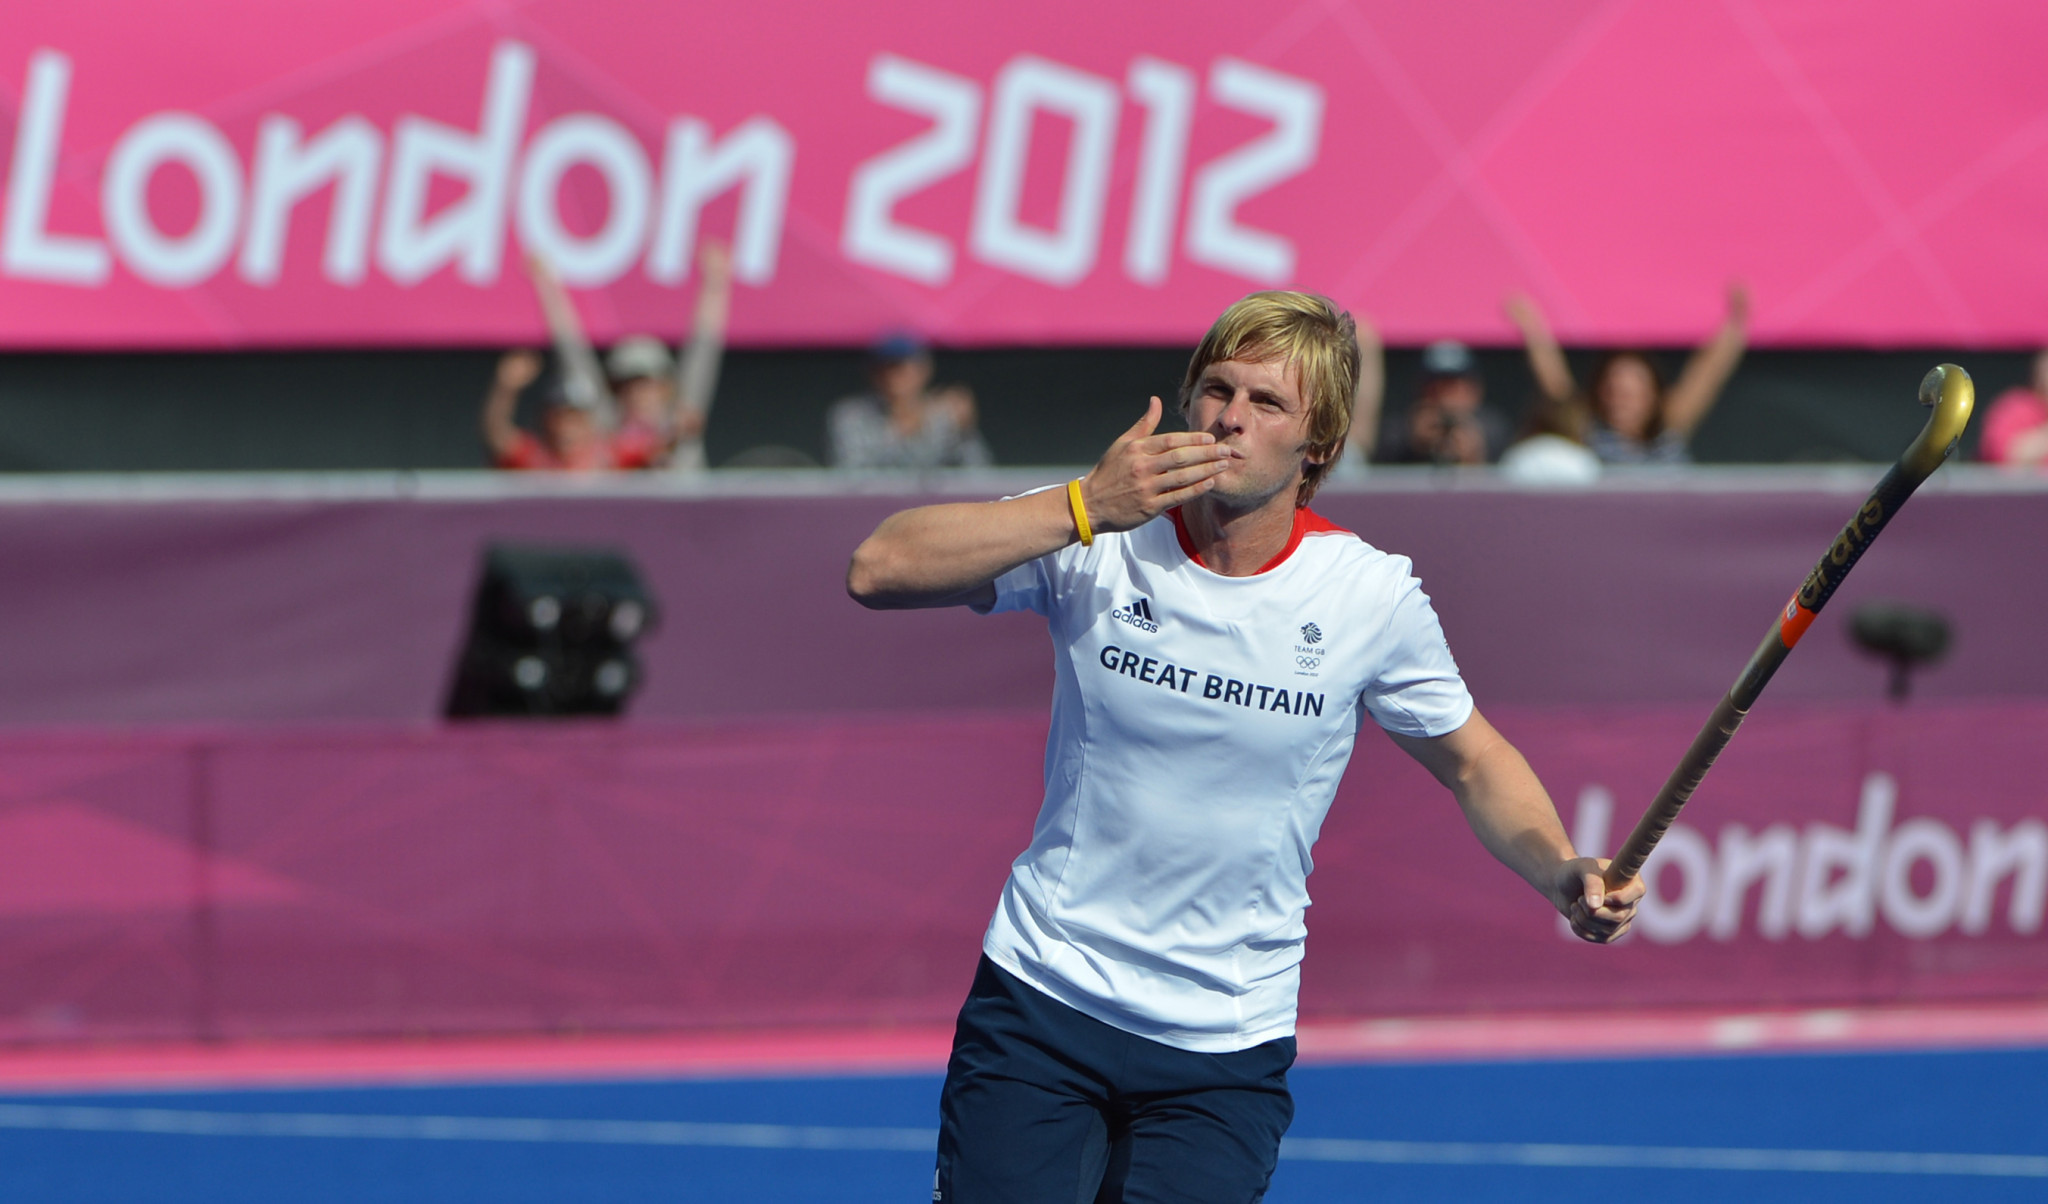 Ashley Jackson, who has scored a record 137 goals for England and Great Britain hockey, has 